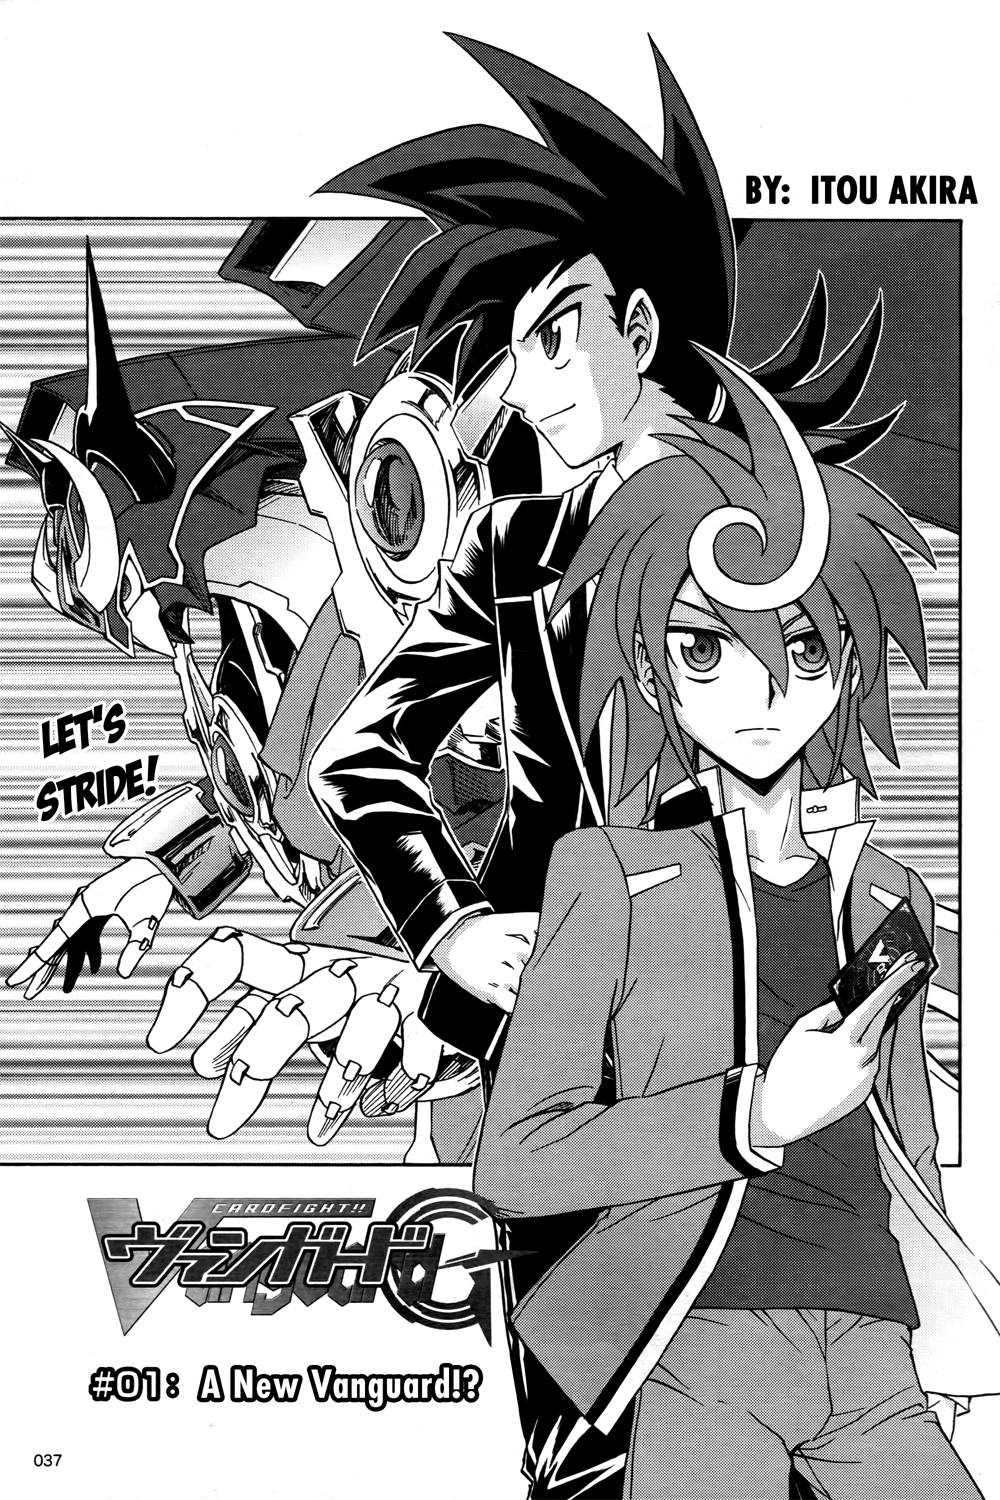 Cardfight!! Vanguard G: The Prologue Vol.1 Chapter 1: A New Vanguard!? - Picture 3